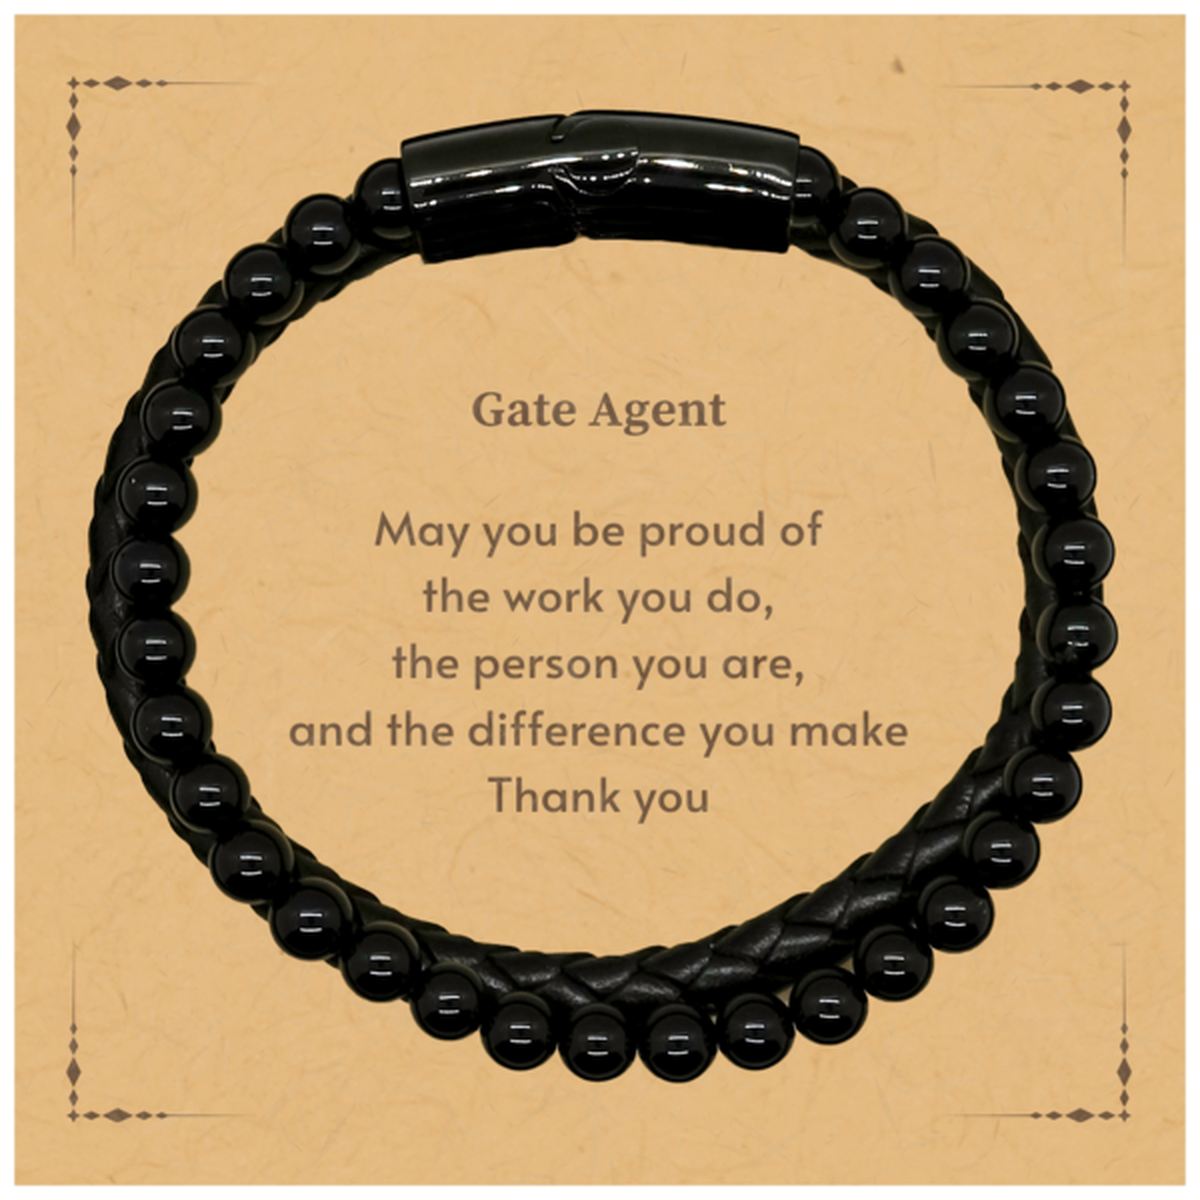 Heartwarming Stone Leather Bracelets Retirement Coworkers Gifts for Gate Agent, Gate Agent May You be proud of the work you do, the person you are Gifts for Boss Men Women Friends